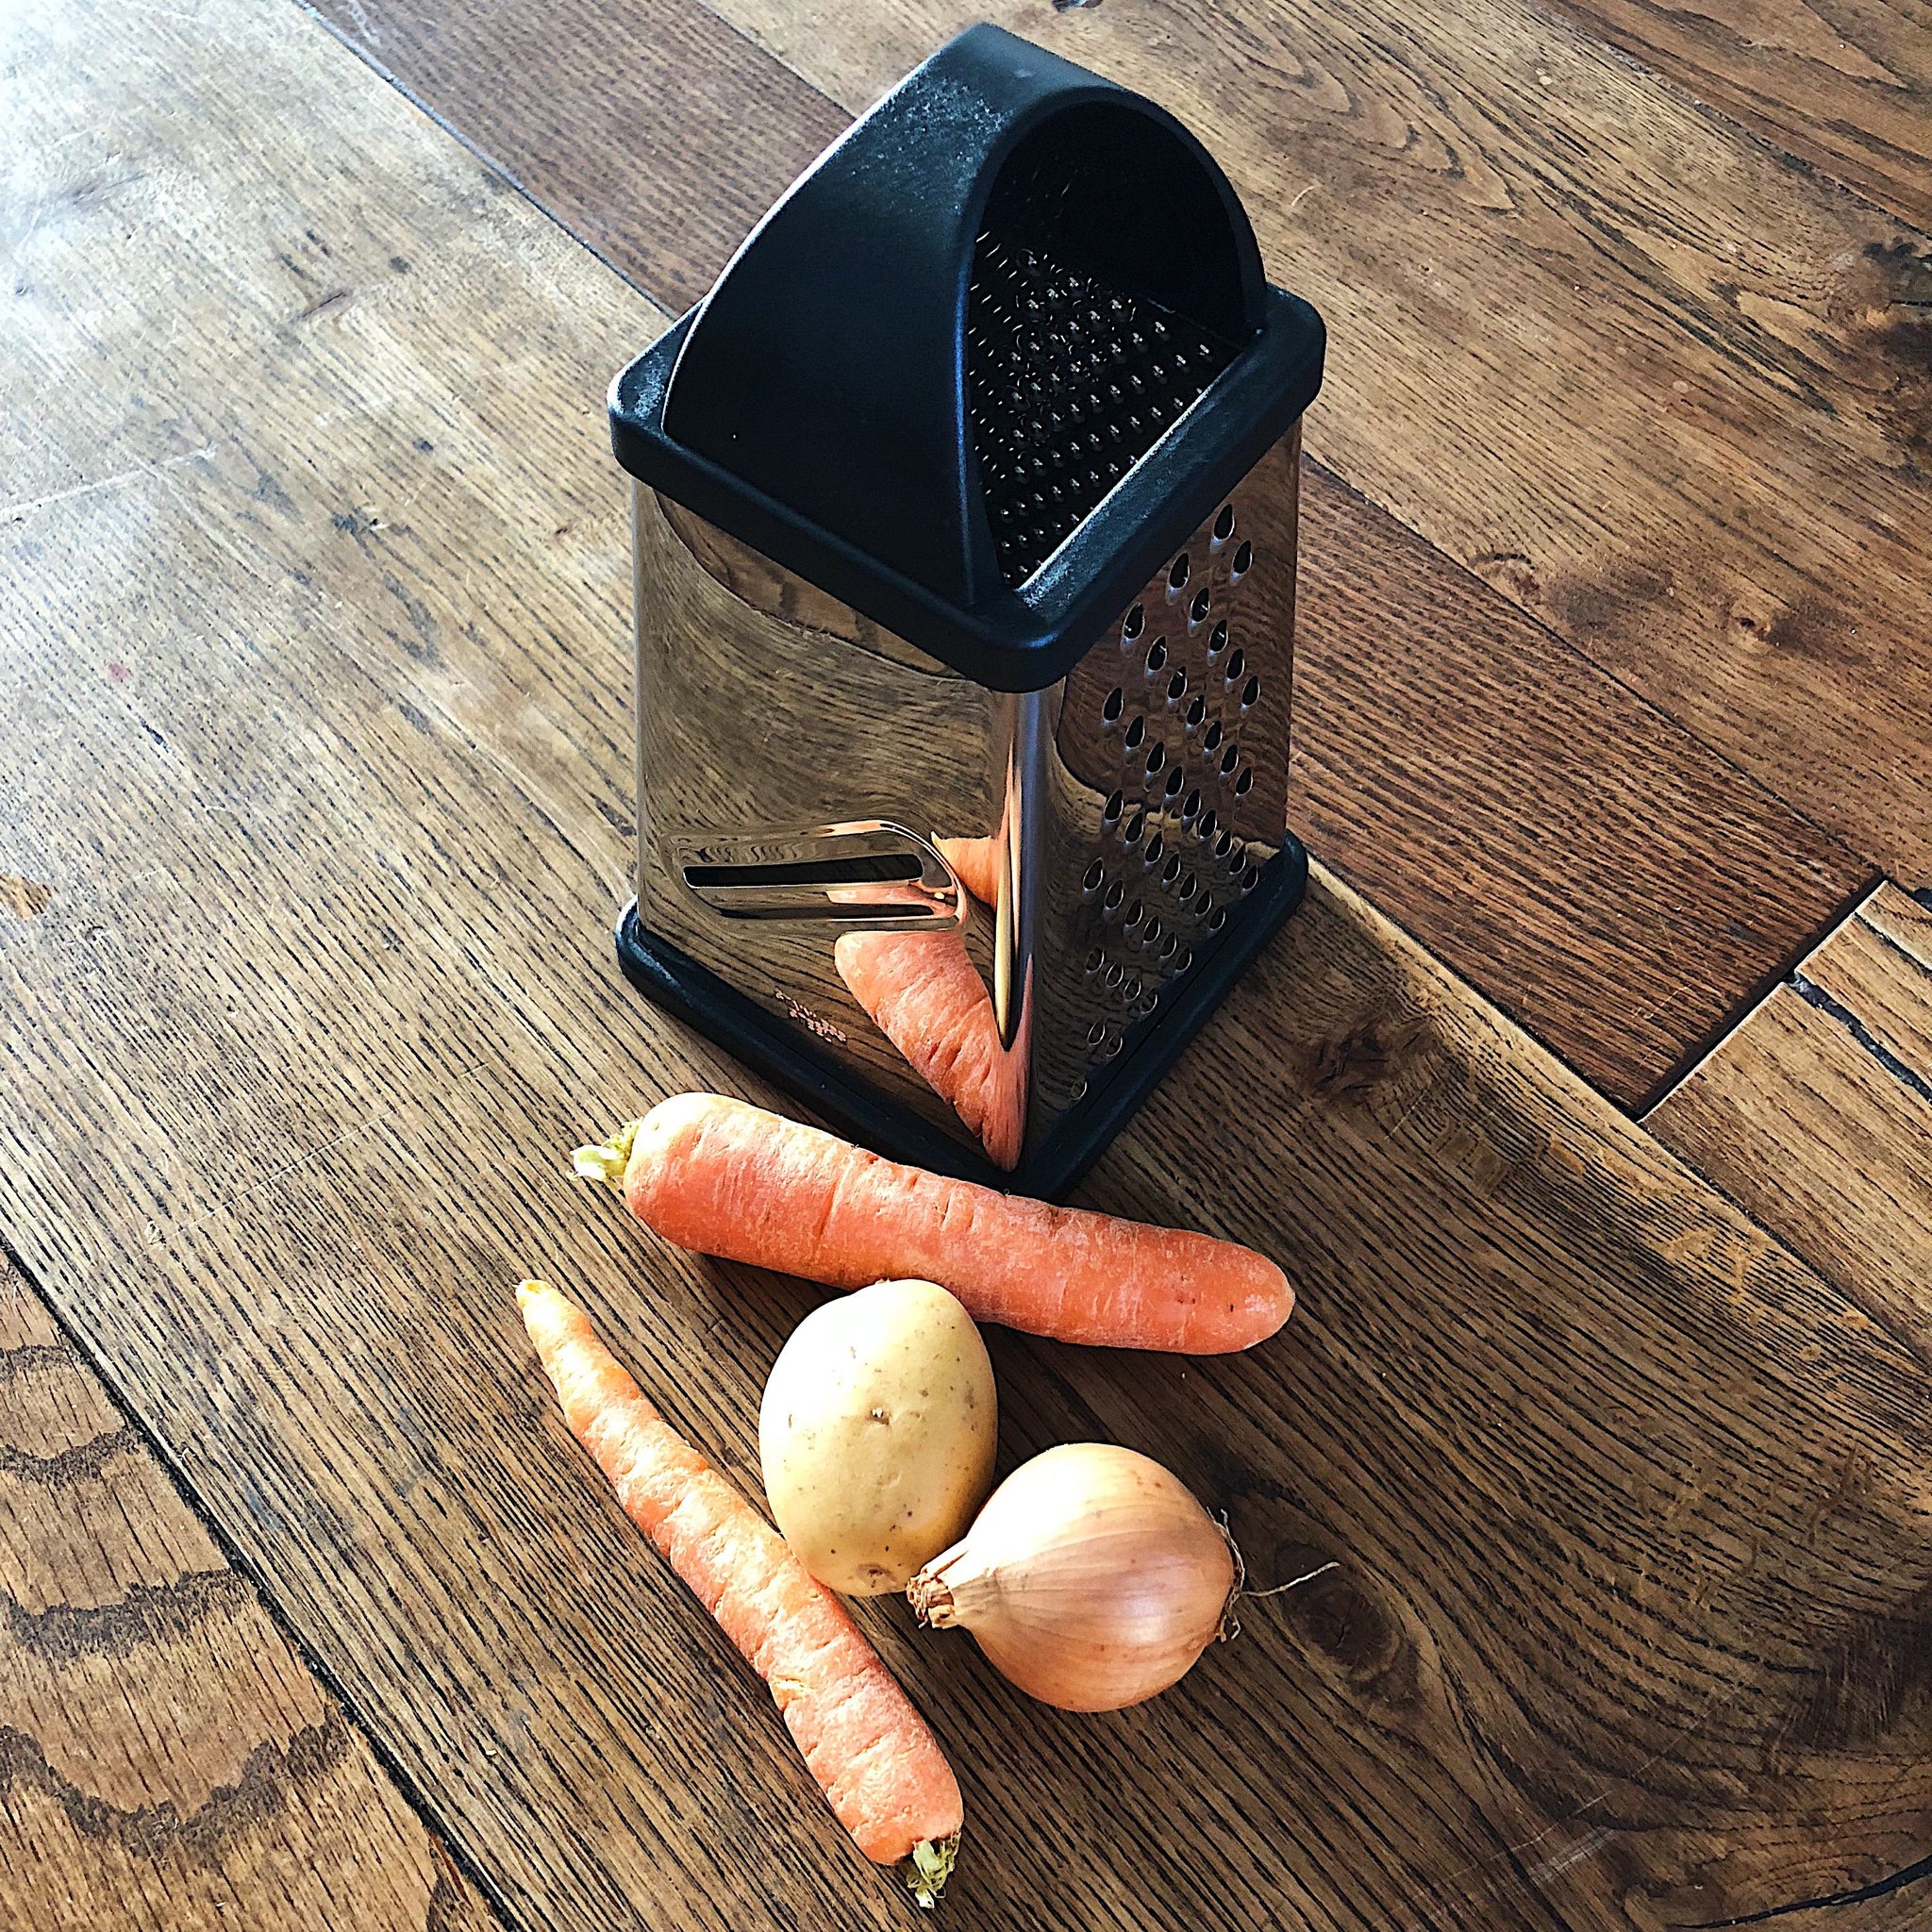 Stainless Steel Four-Sided Grater